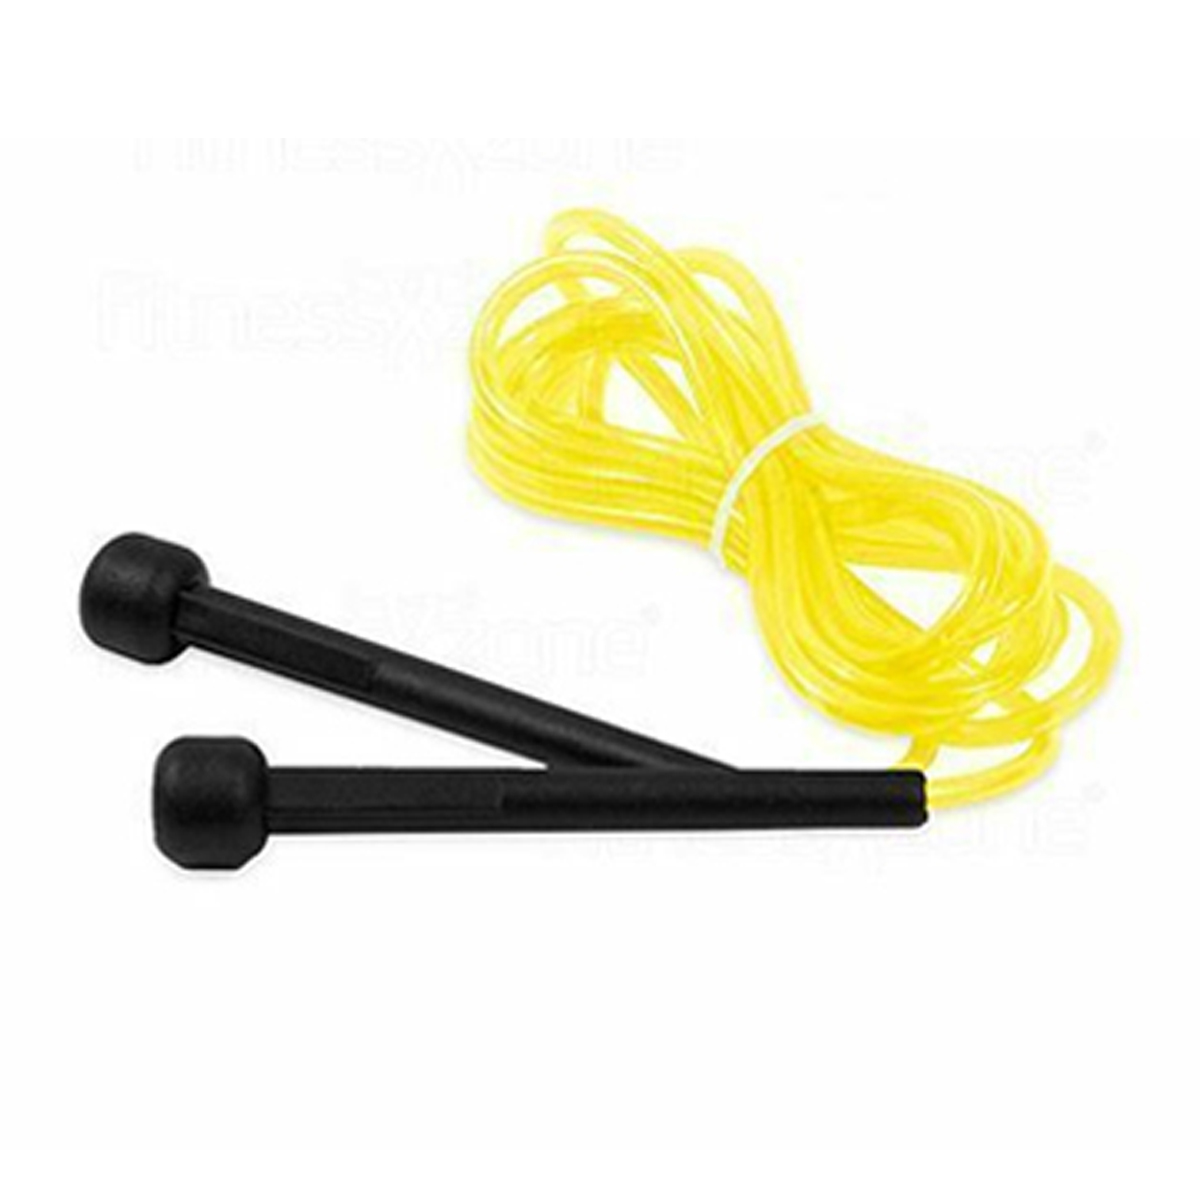 9ft28m-Length-PVC-Skipping-Rope-Home-Sports-Kids-Rope-Jumping-Gym-Fitness-Exercise-Rope-1661342-1